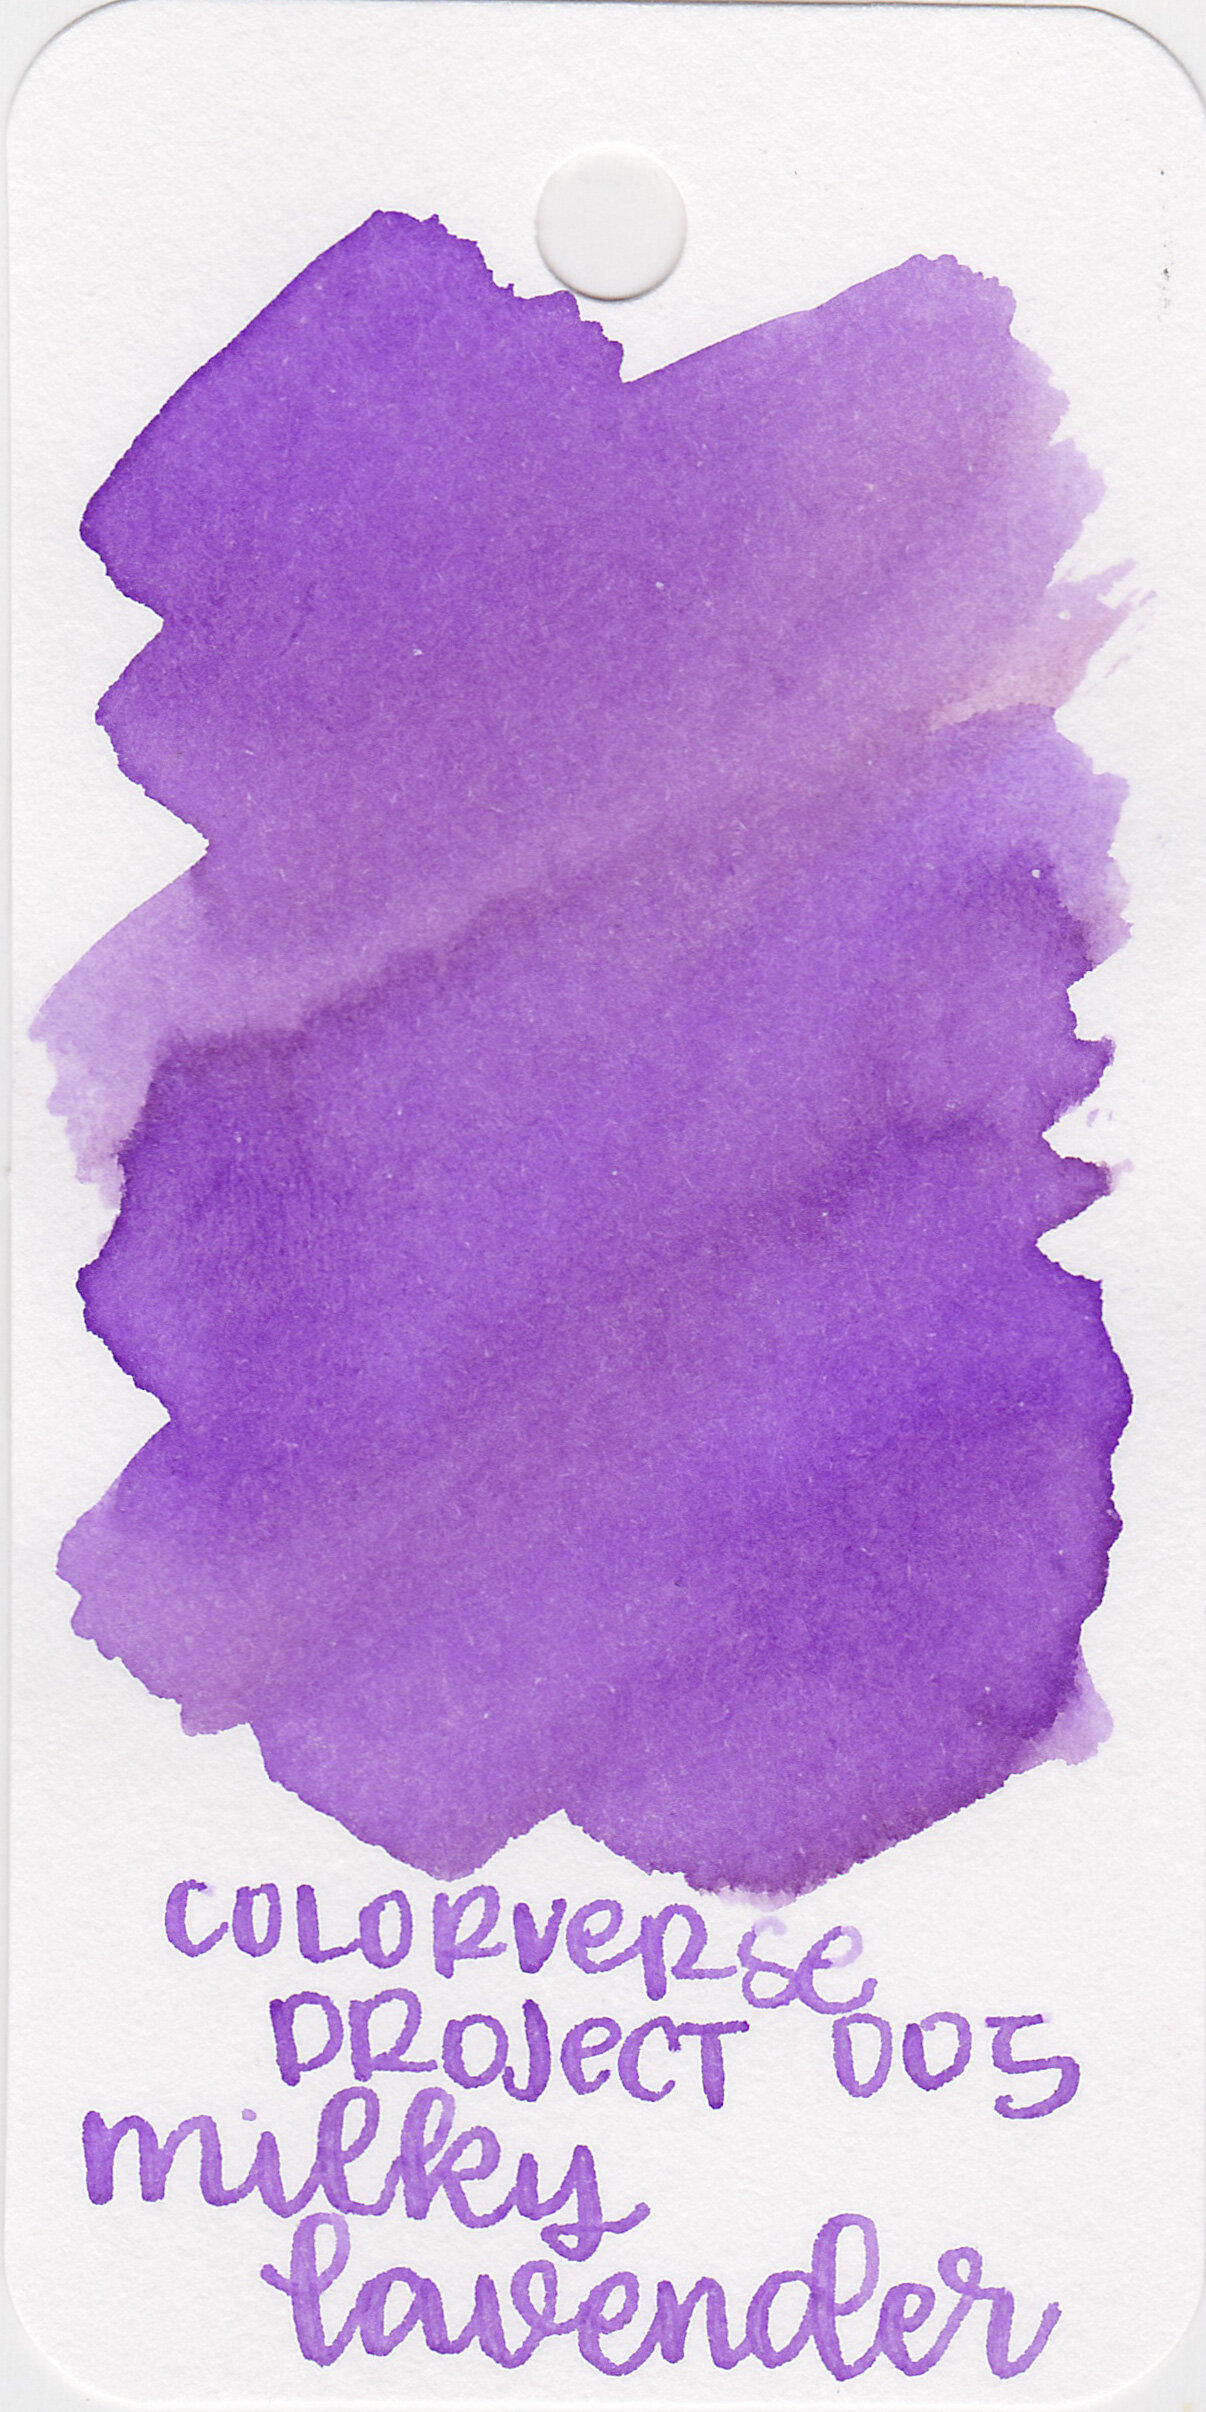 Ink Review #1486: Colorverse 005 Milky Lavender — Mountain of Ink